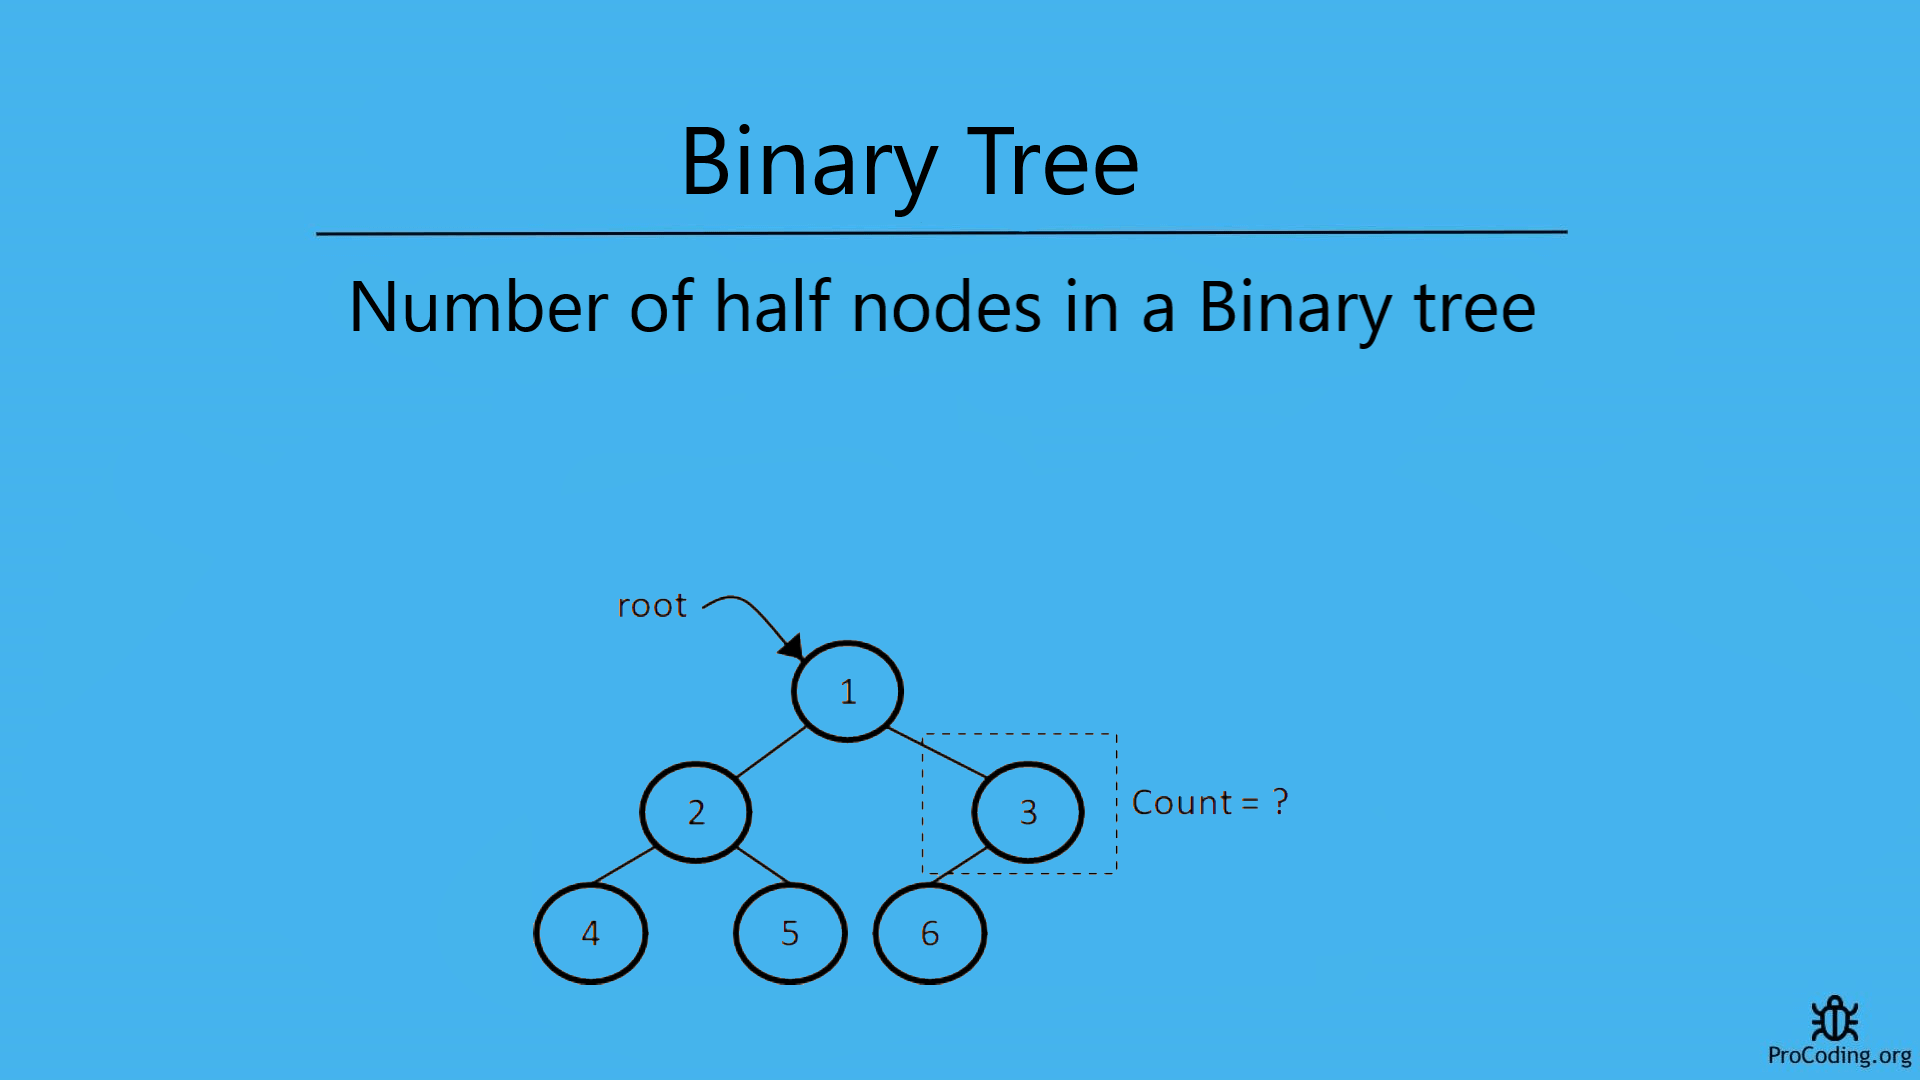 Number of half nodes in a binary tree